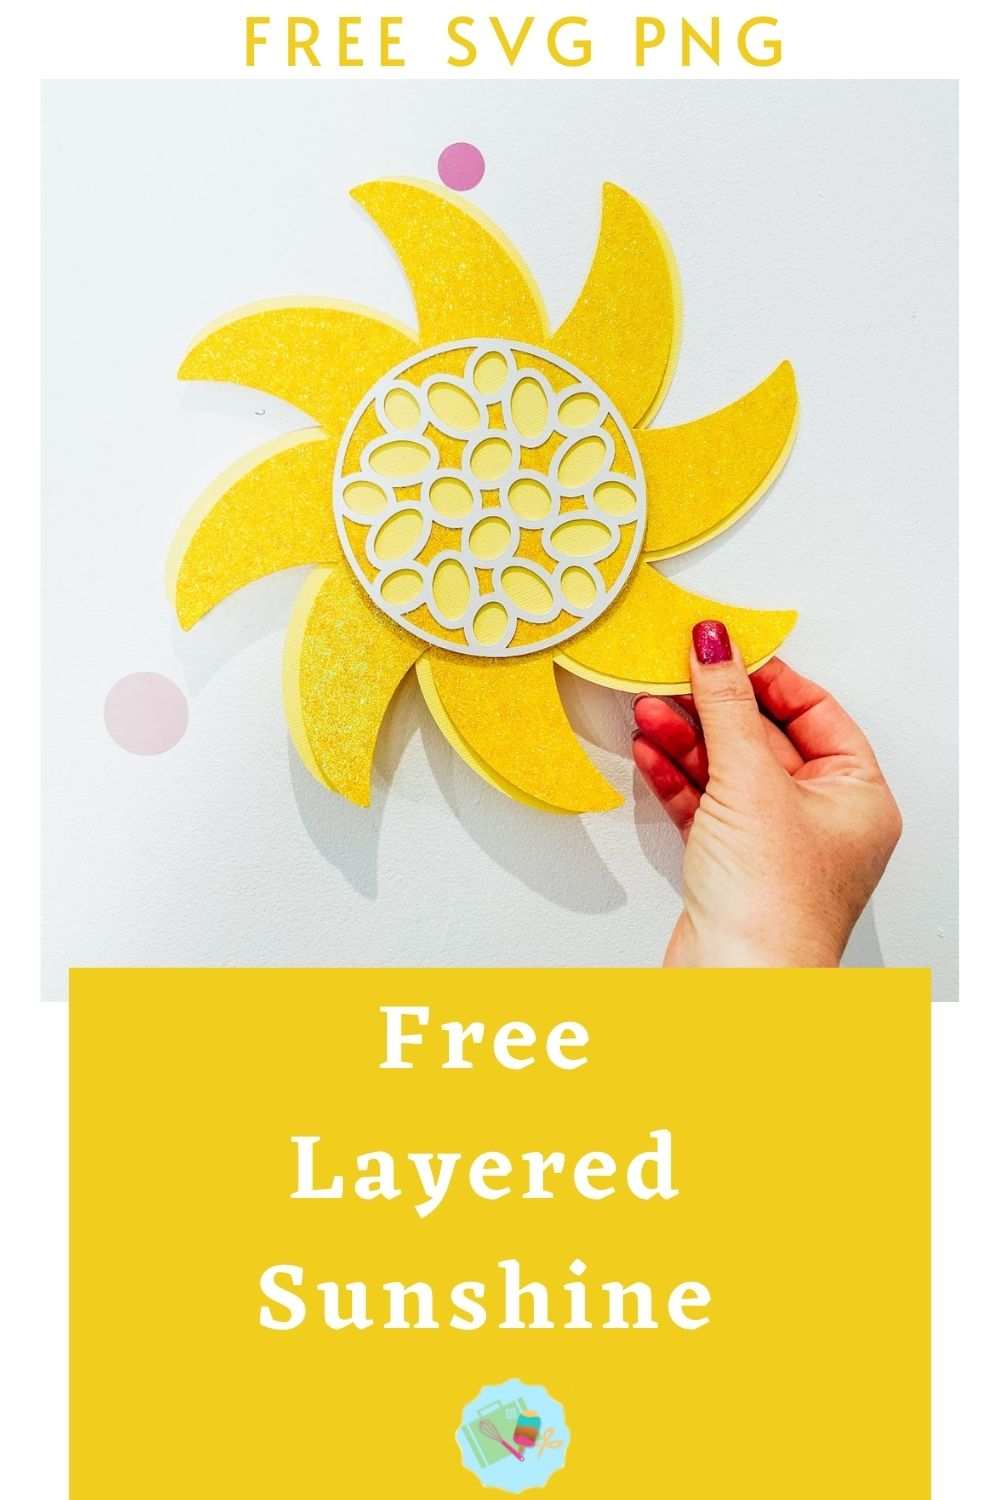 Free SVG Layered Sunshine for Cricut and Silhouette for crafting and scrapbooking